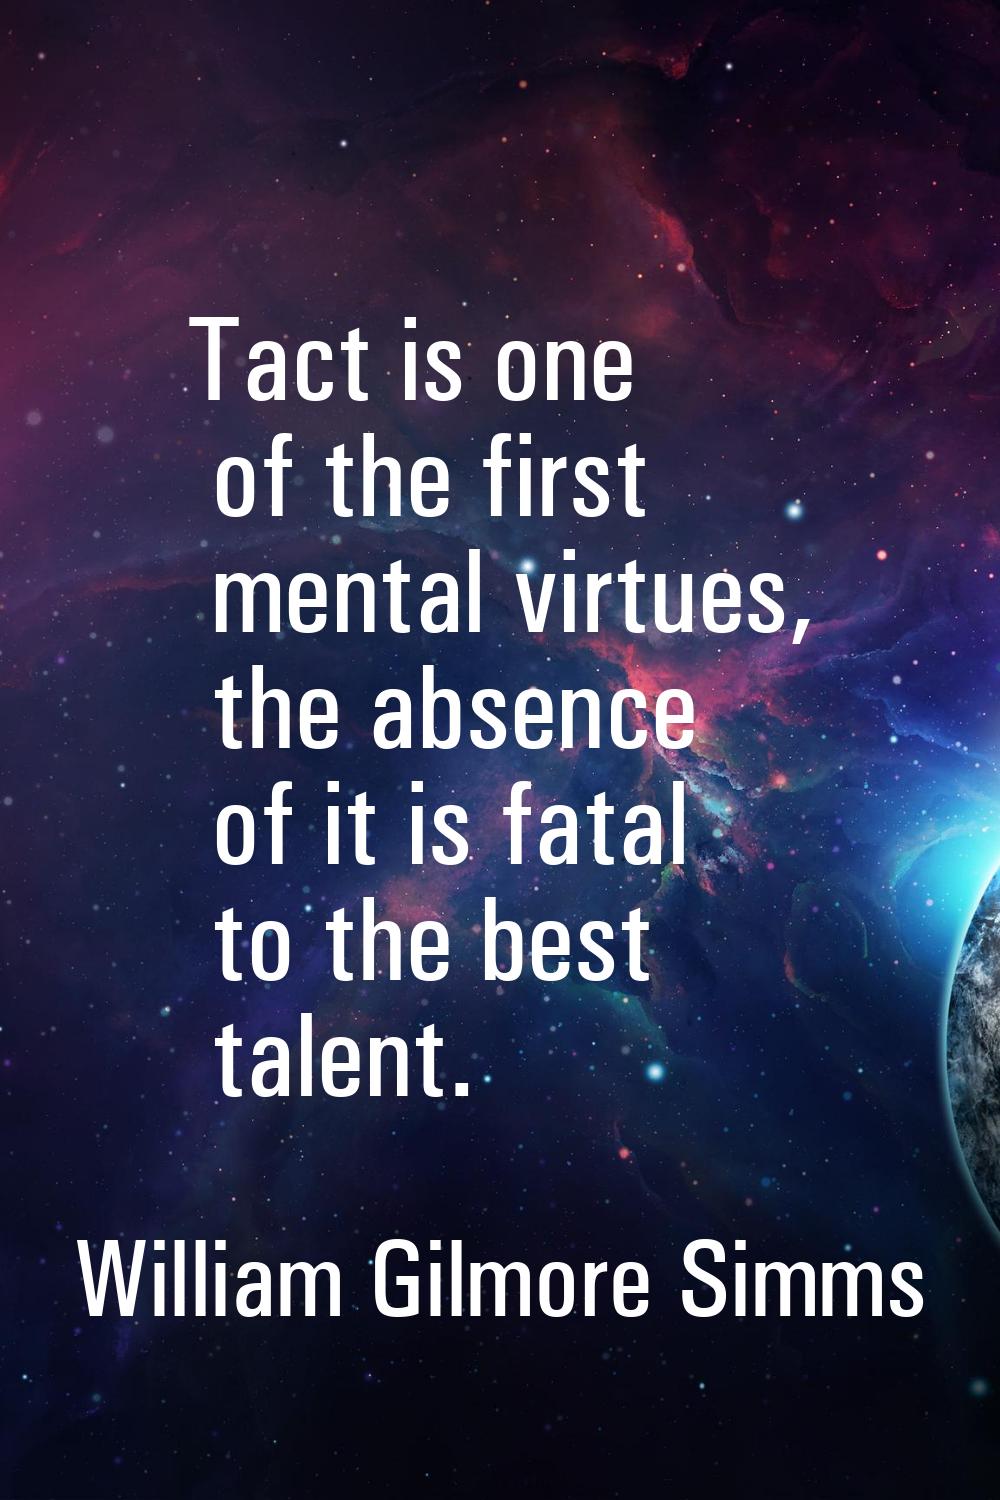 Tact is one of the first mental virtues, the absence of it is fatal to the best talent.